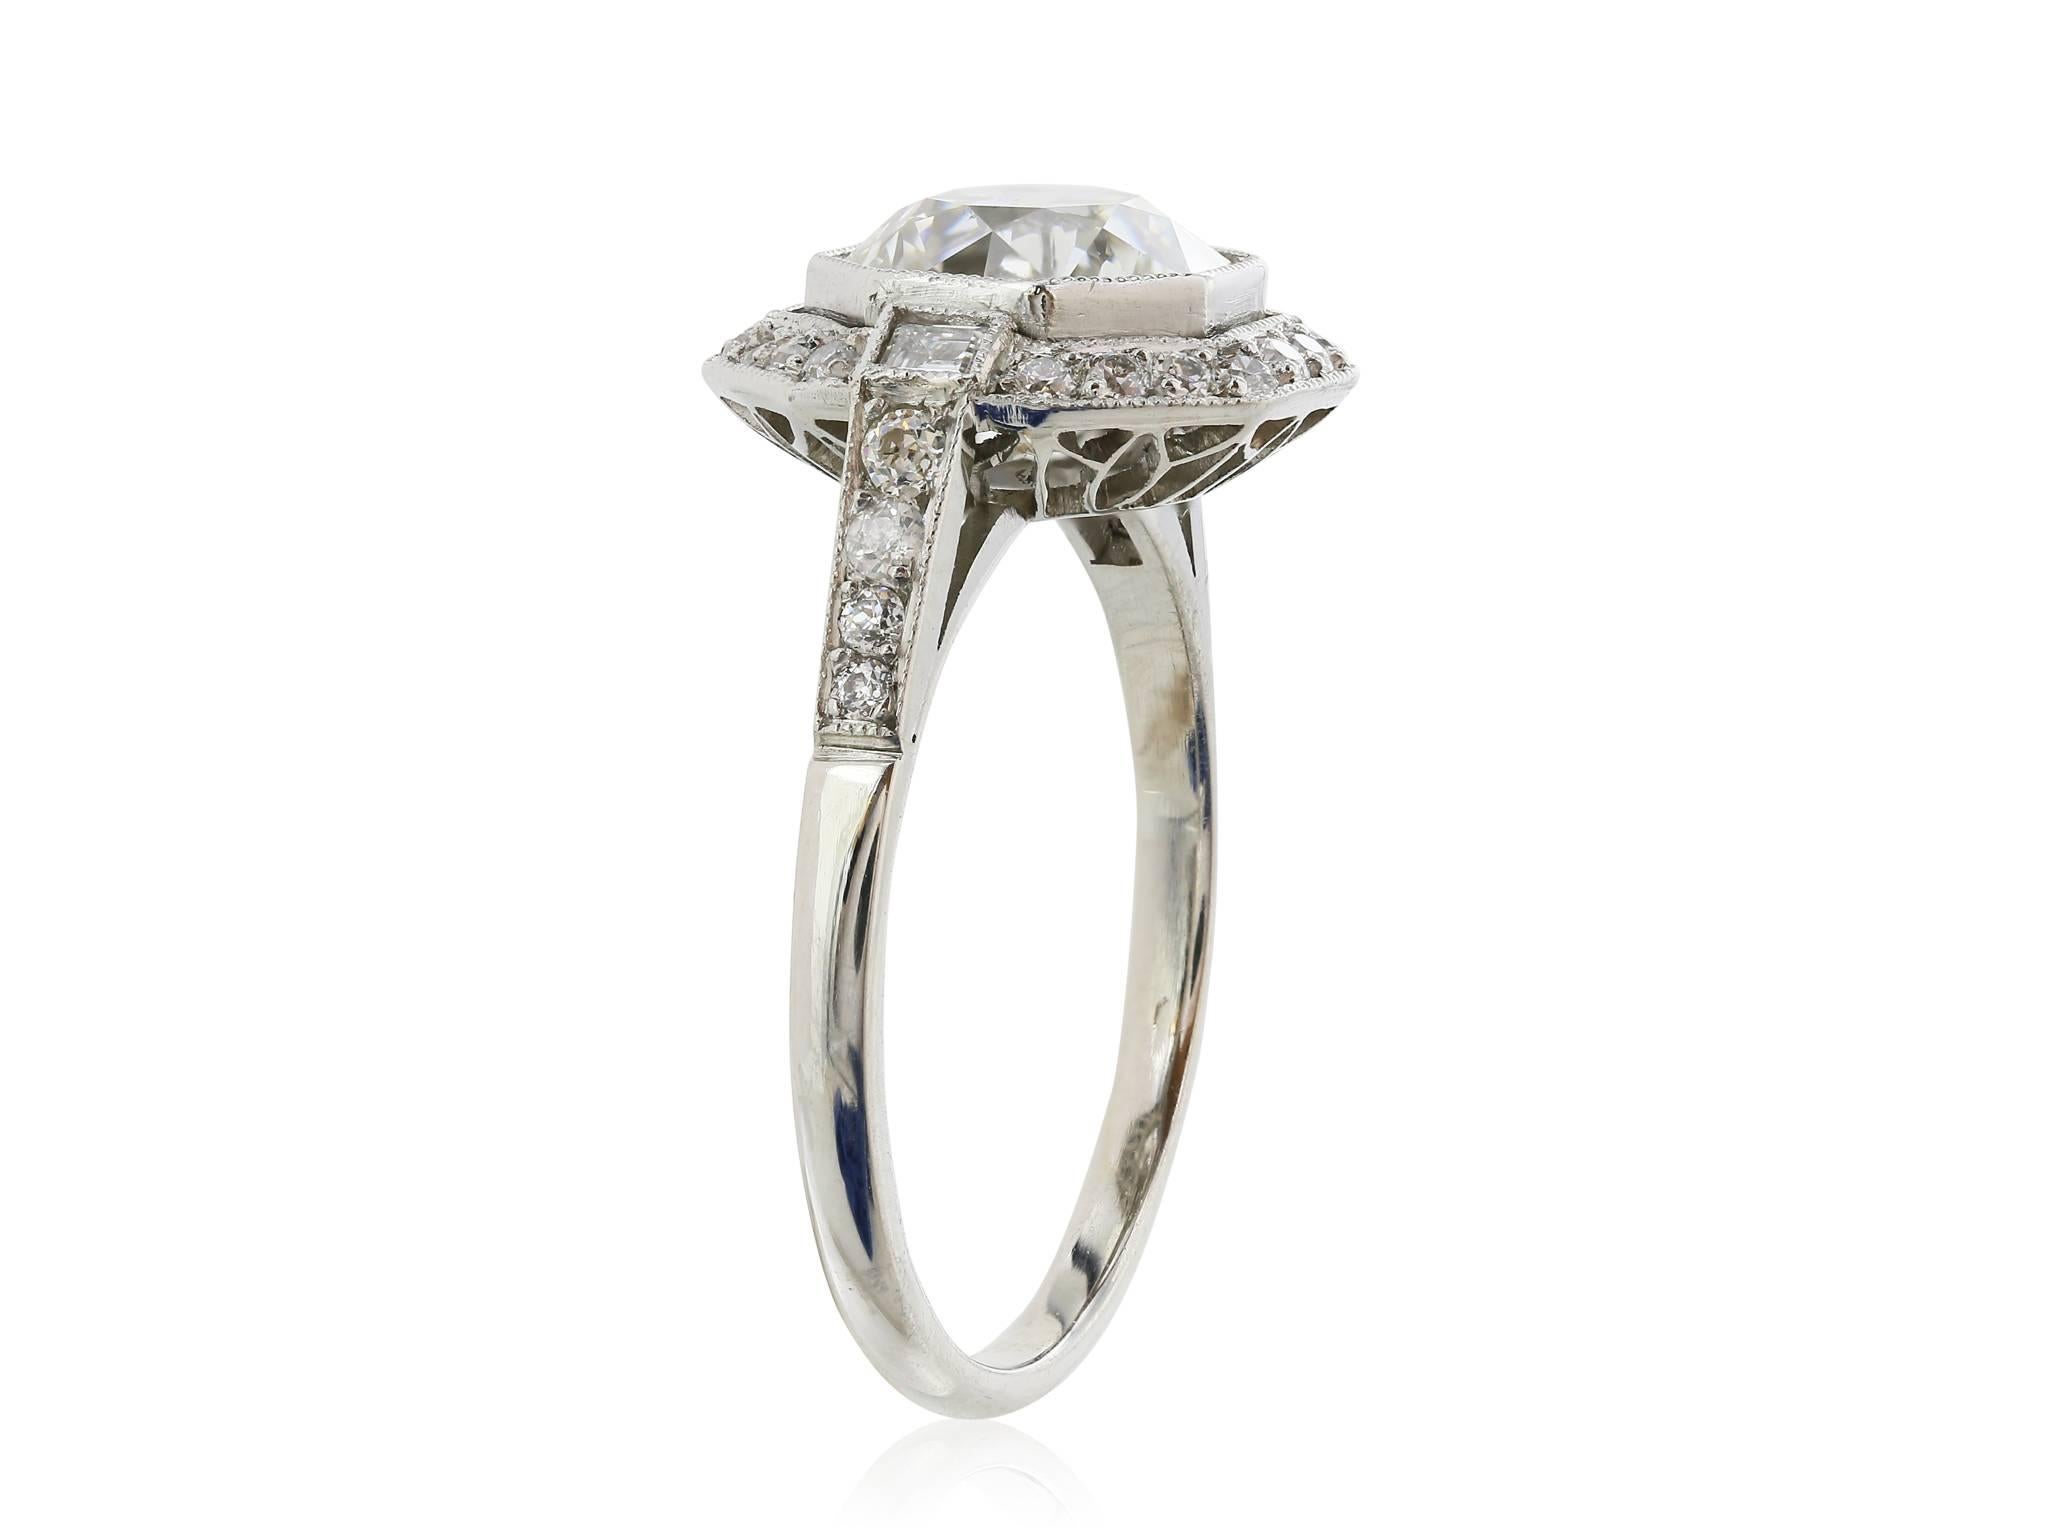 18 Karat white gold antique inspired diamond ring with one 2.18 carat Old European cut diamond with a color of J and a clarity of VS2.  The diamond is surrounded by a row of round brilliant cut white diamonds weighing approximately .50 carats set in